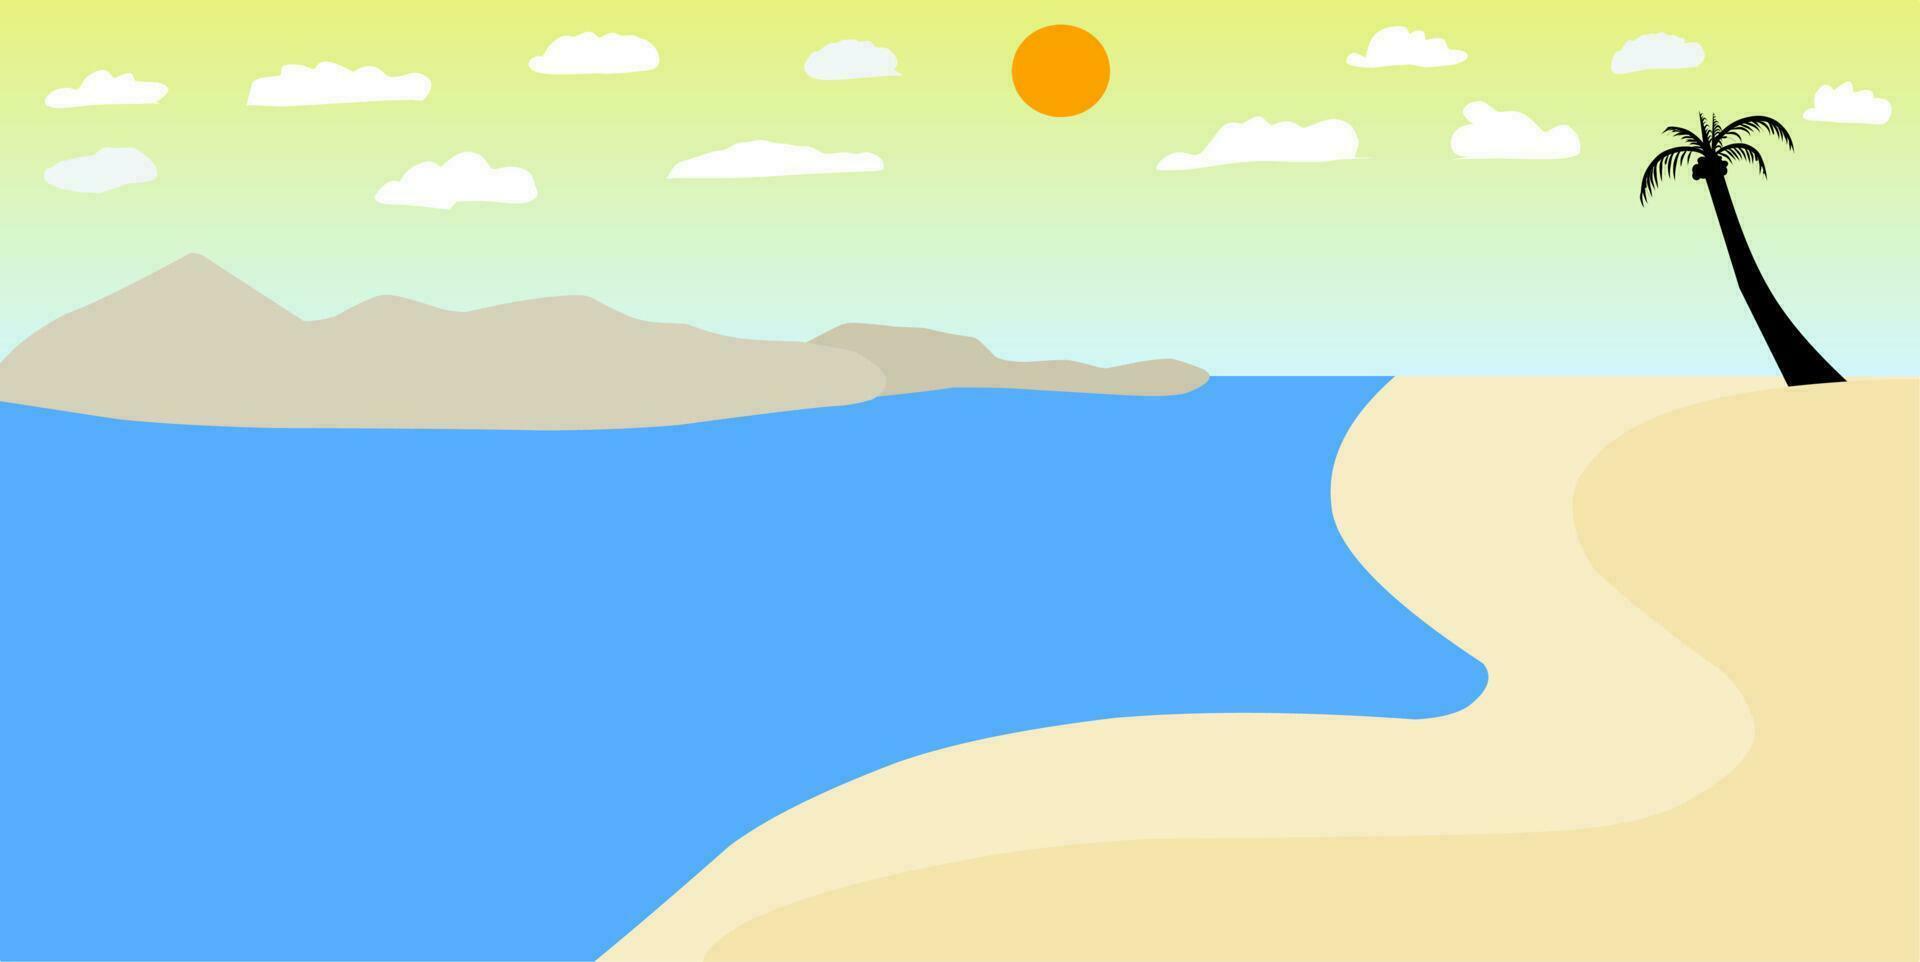 simple design of summer beach and natural scenery background template. vector